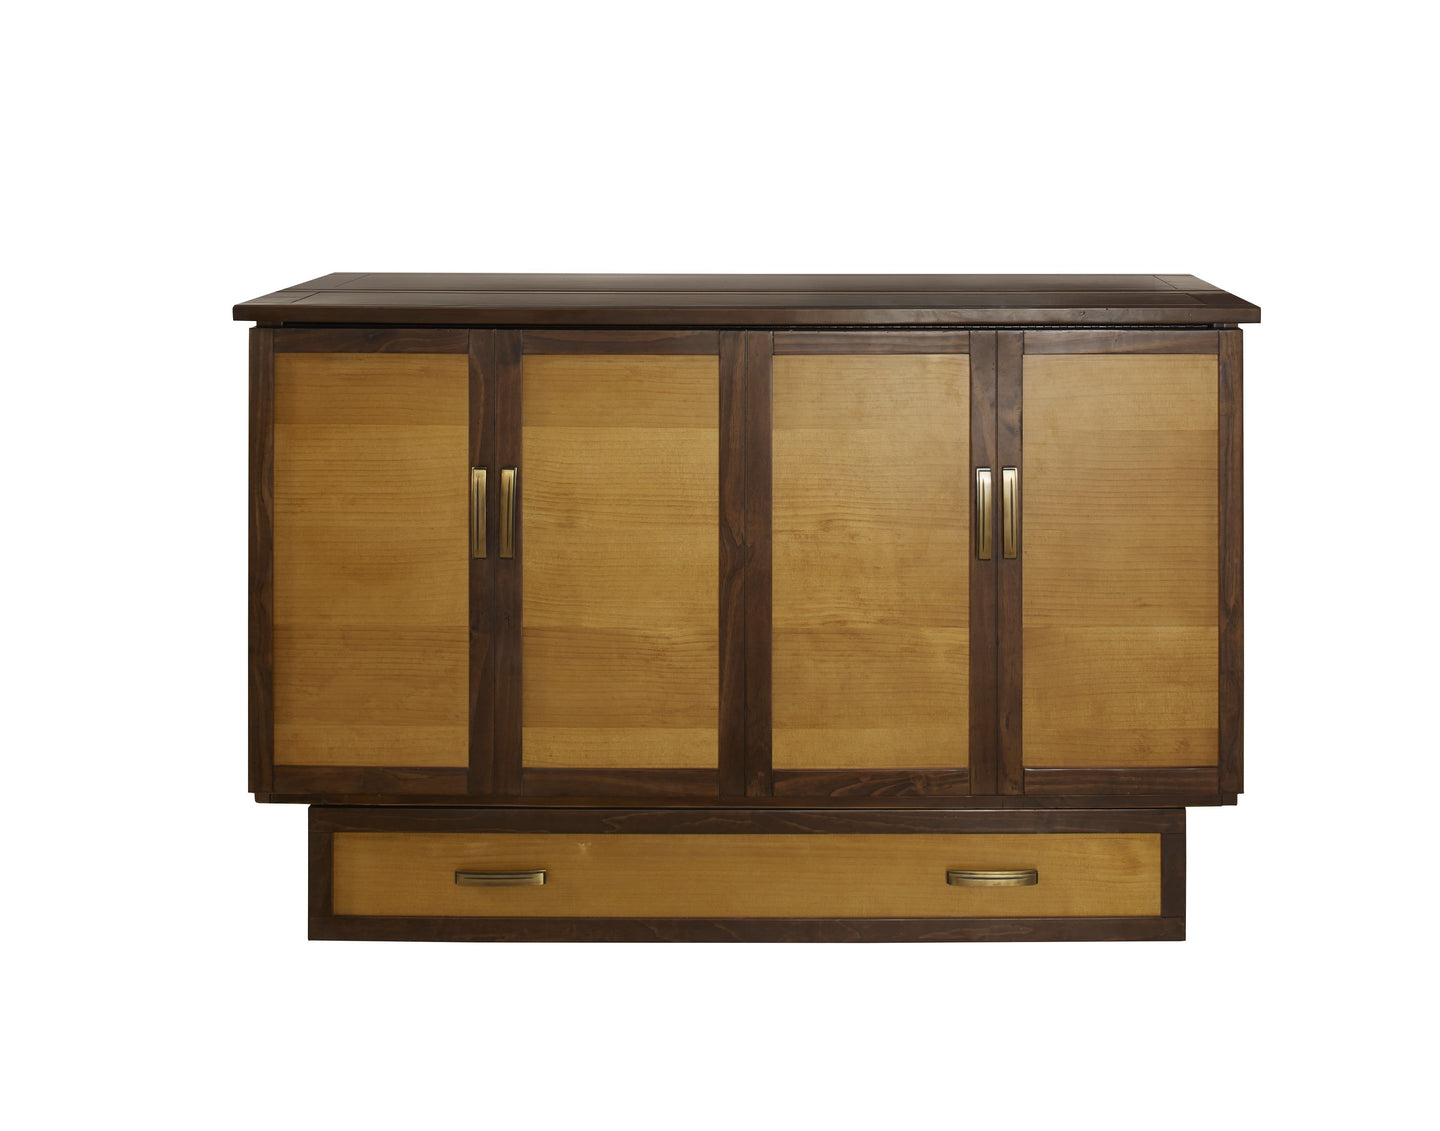 Bridgeport creden zzz cabinet bed Two Tone Stained Wood